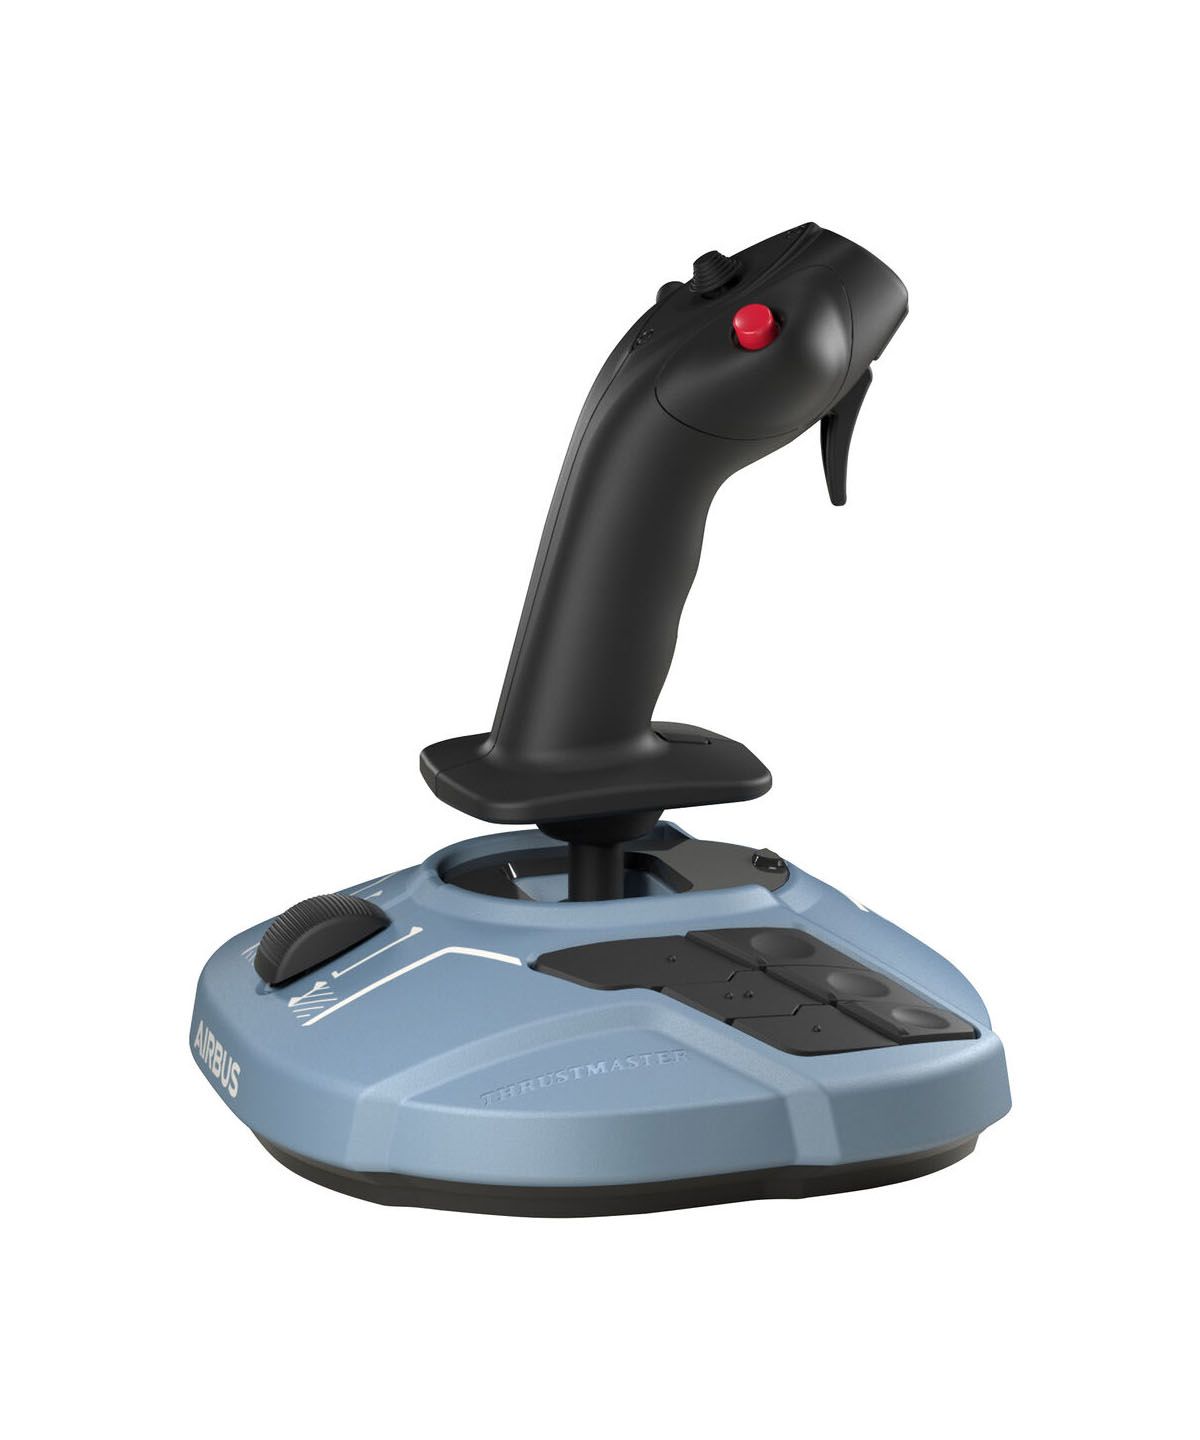 Lai May Bay Thrustmaster Tca Sidestick Airbus Edition 3